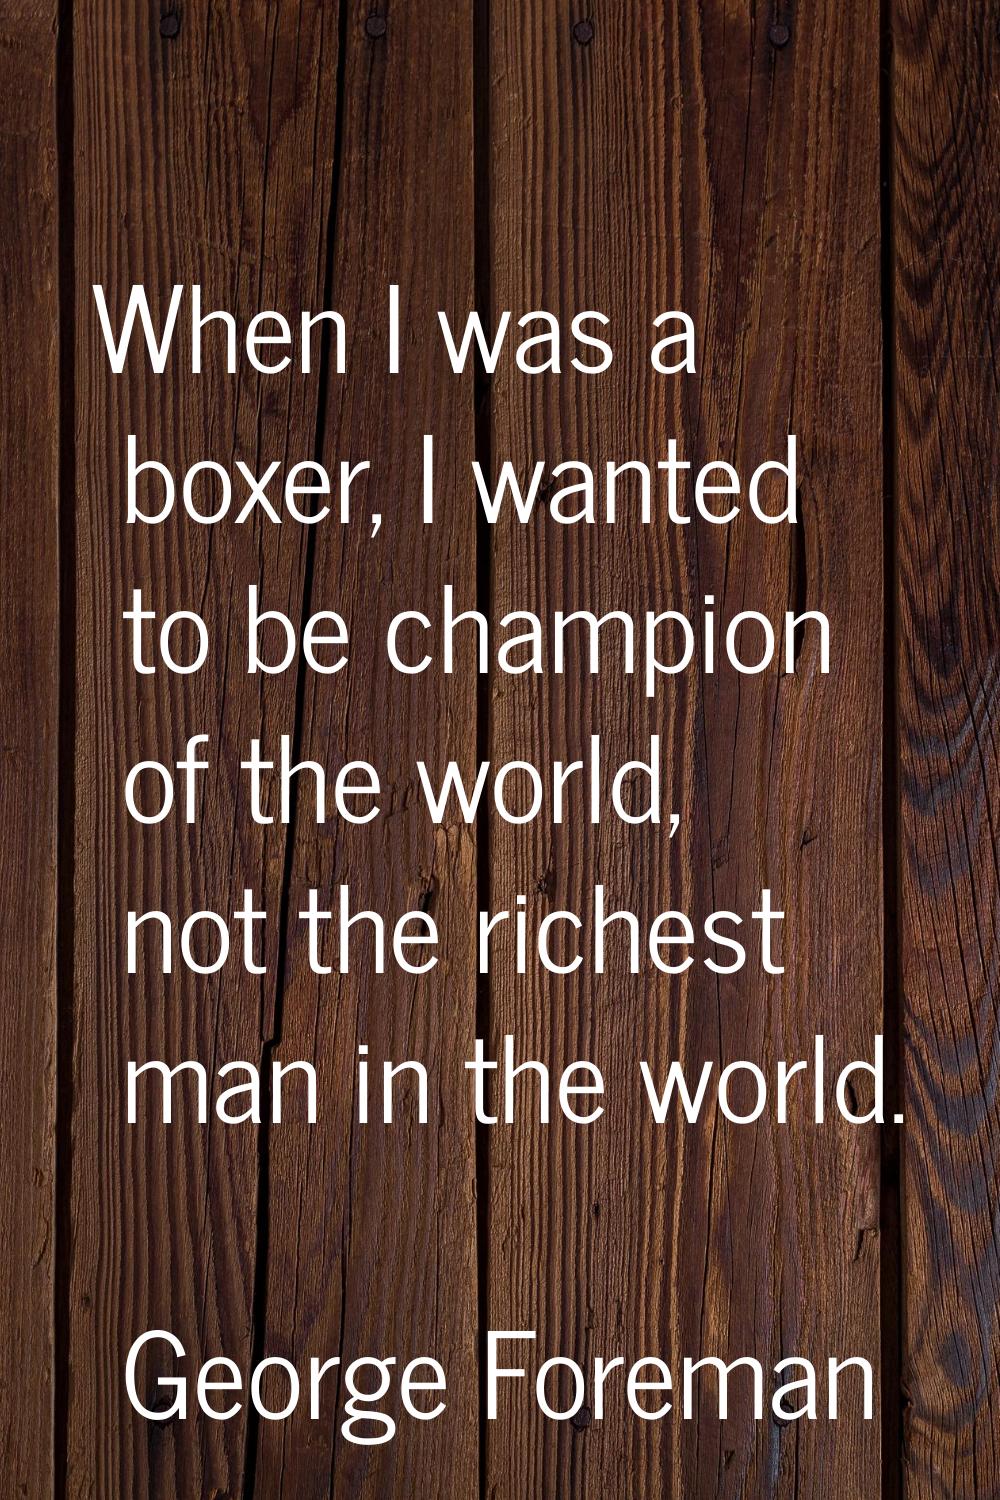 When I was a boxer, I wanted to be champion of the world, not the richest man in the world.